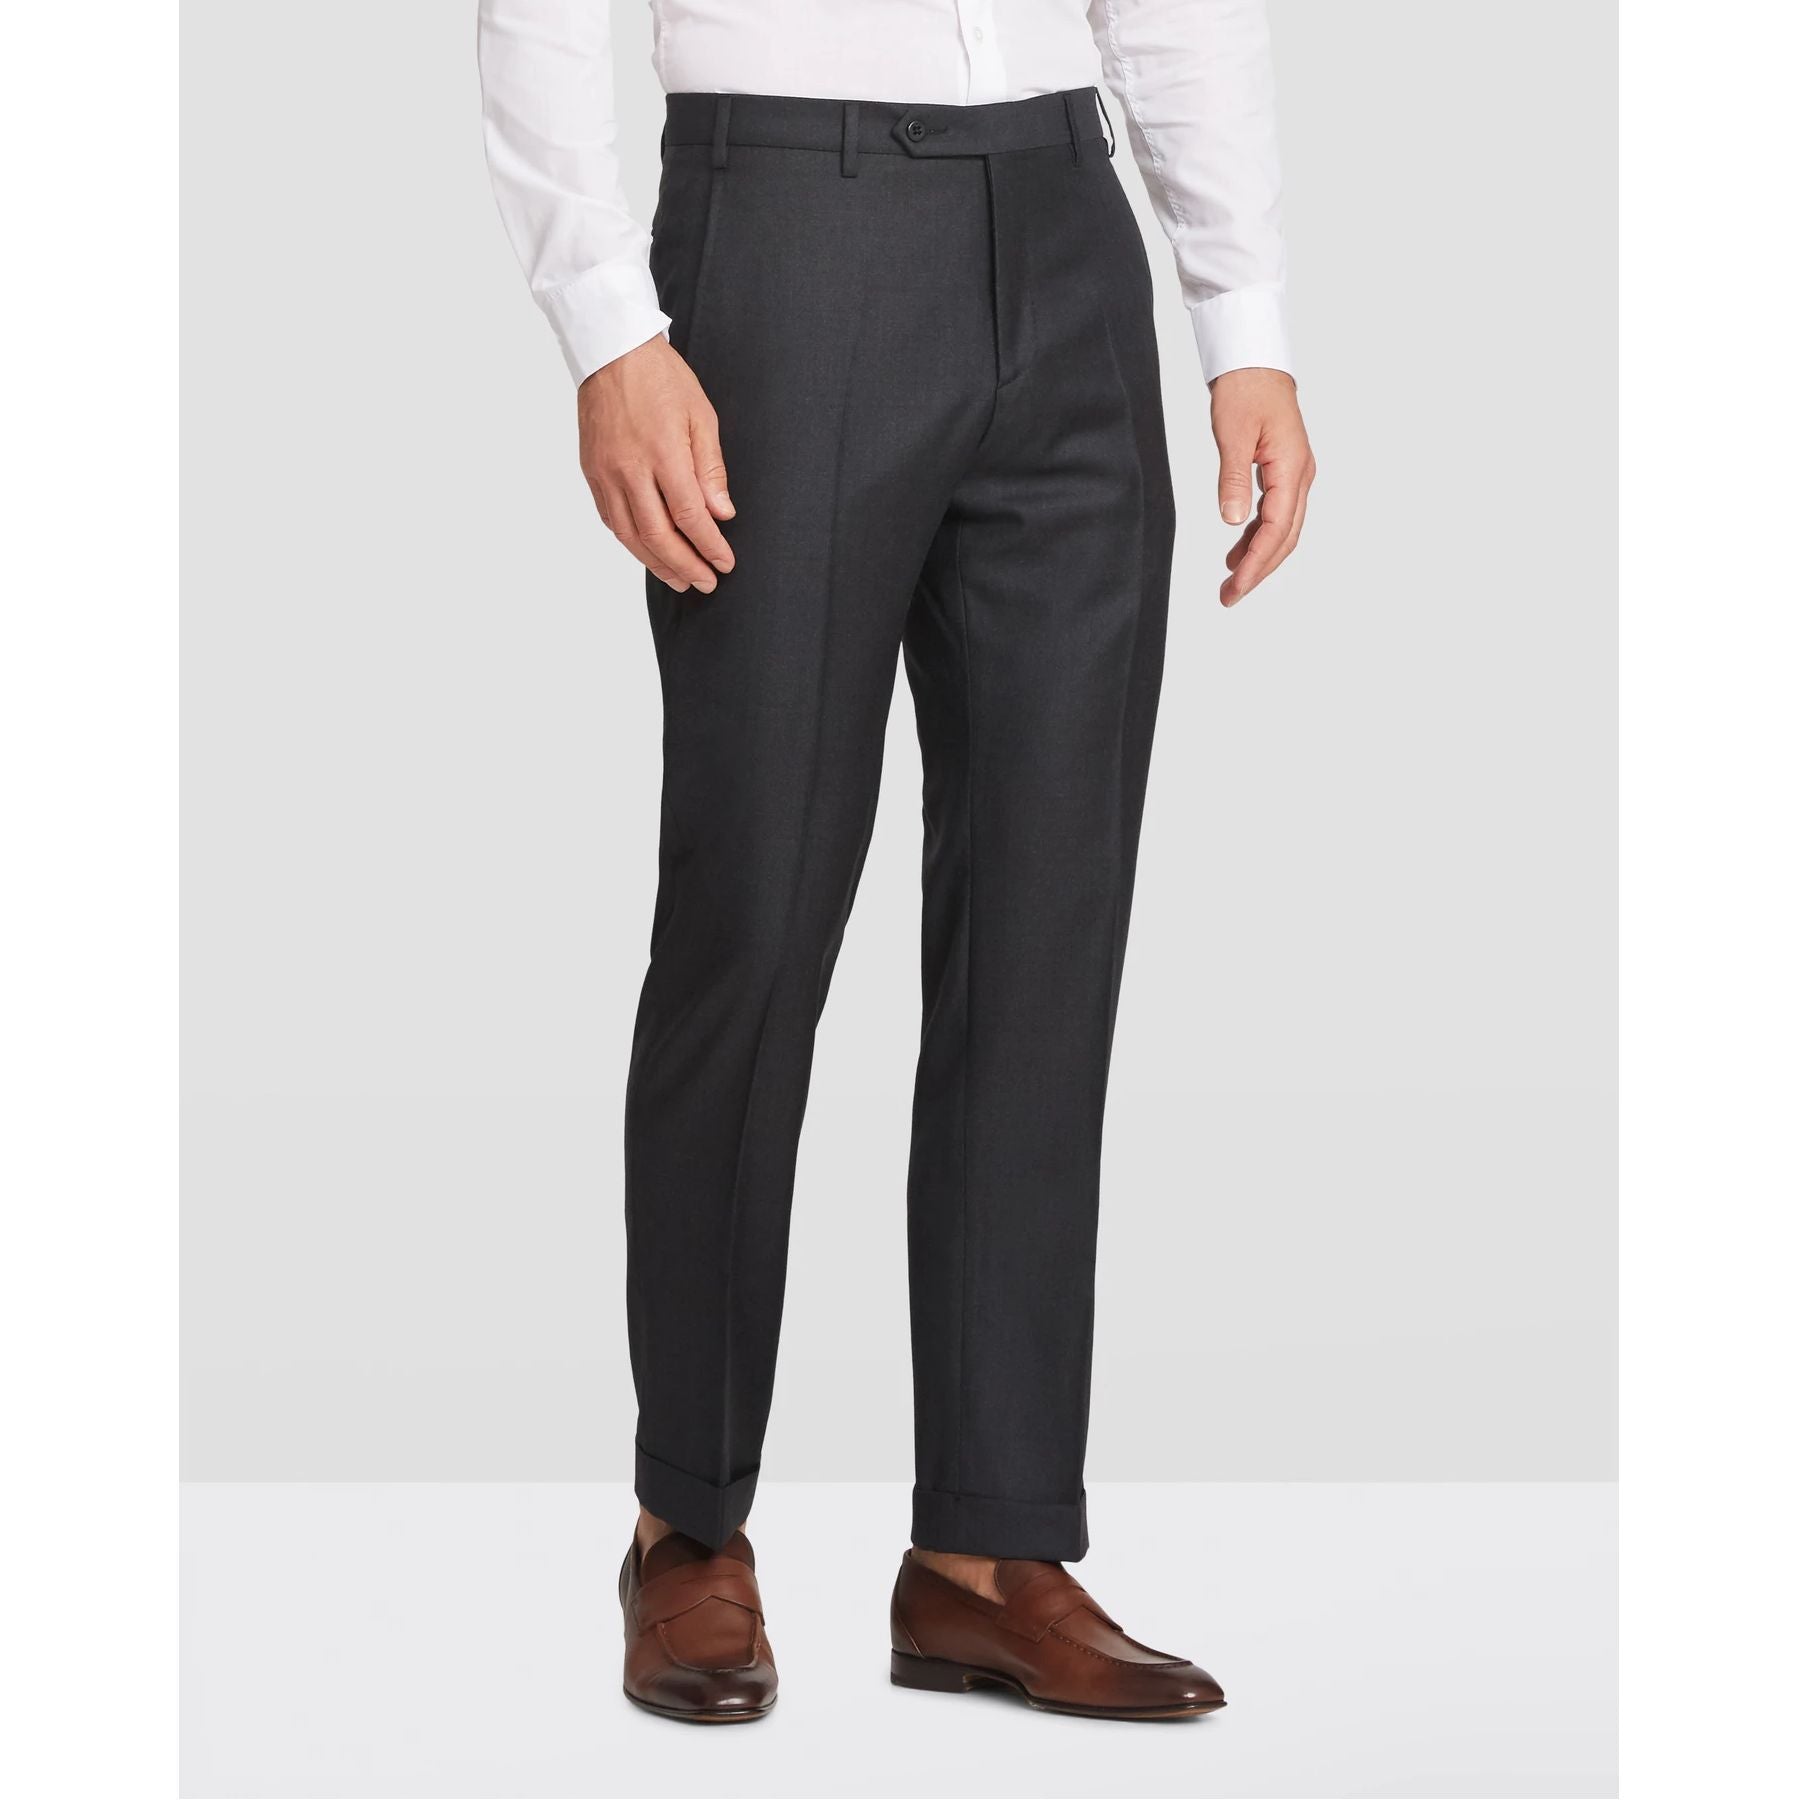 Parker Flat Front Stretch Wool Trouser in Charcoal (Modern Straight Fit) by Zanella